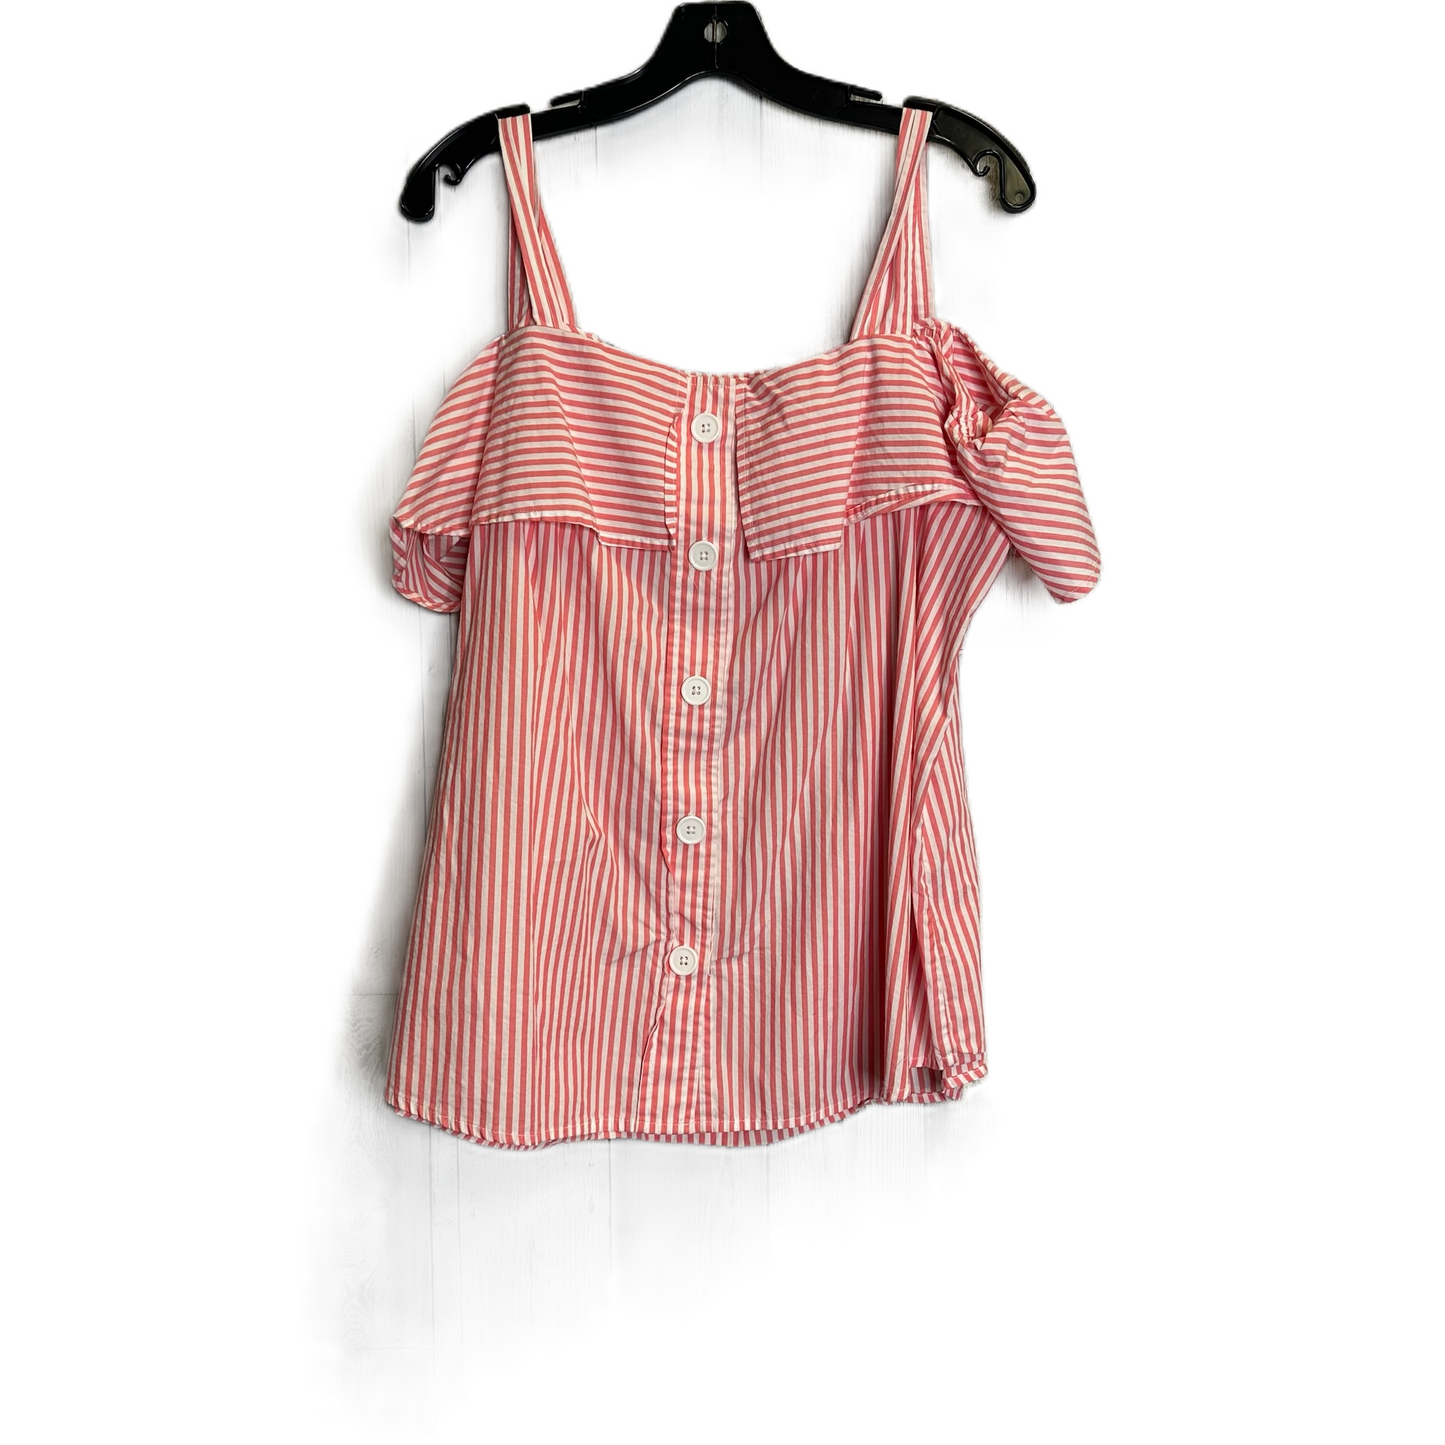 Red & White Top Short Sleeve By Crown And Ivy, Size: 2x